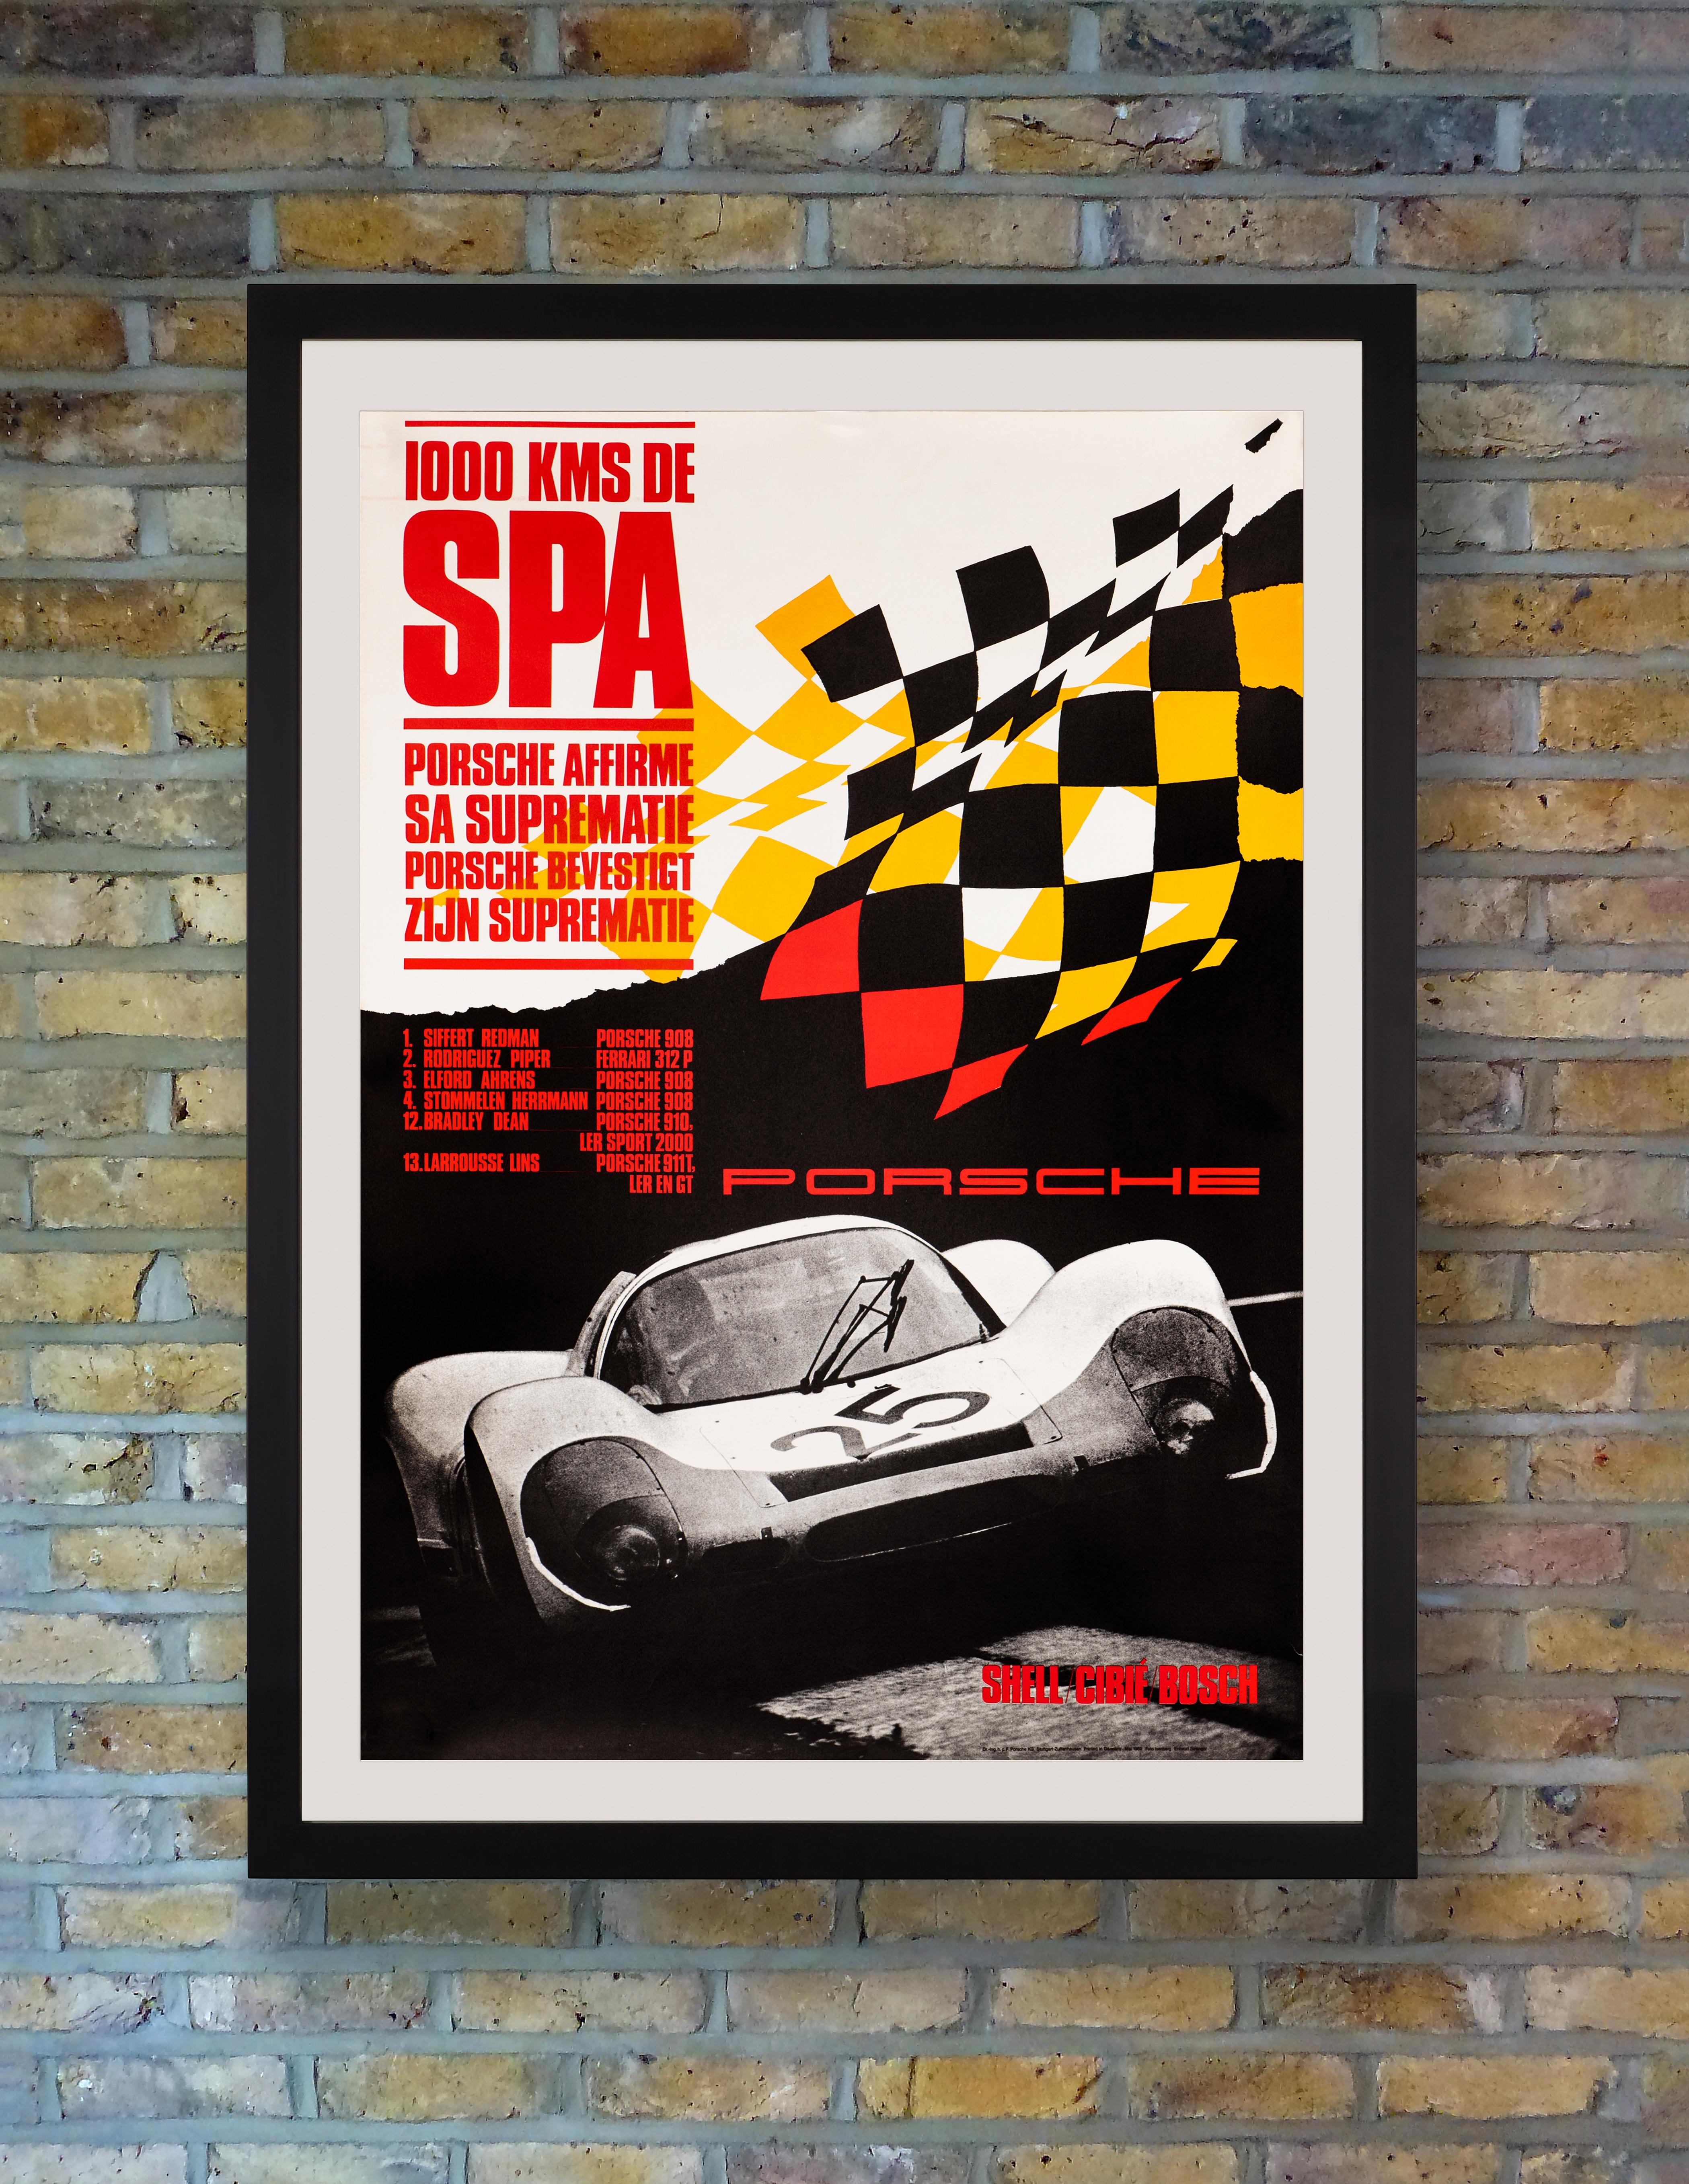 An original vintage Porsche motorsport victory poster published in French and Dutch to celebrate the victory of its racing car team led by Jo Siffert and Brian Redman in a Porsche 908 at the 1000 Kilometers of Spa endurance race at Circuit de